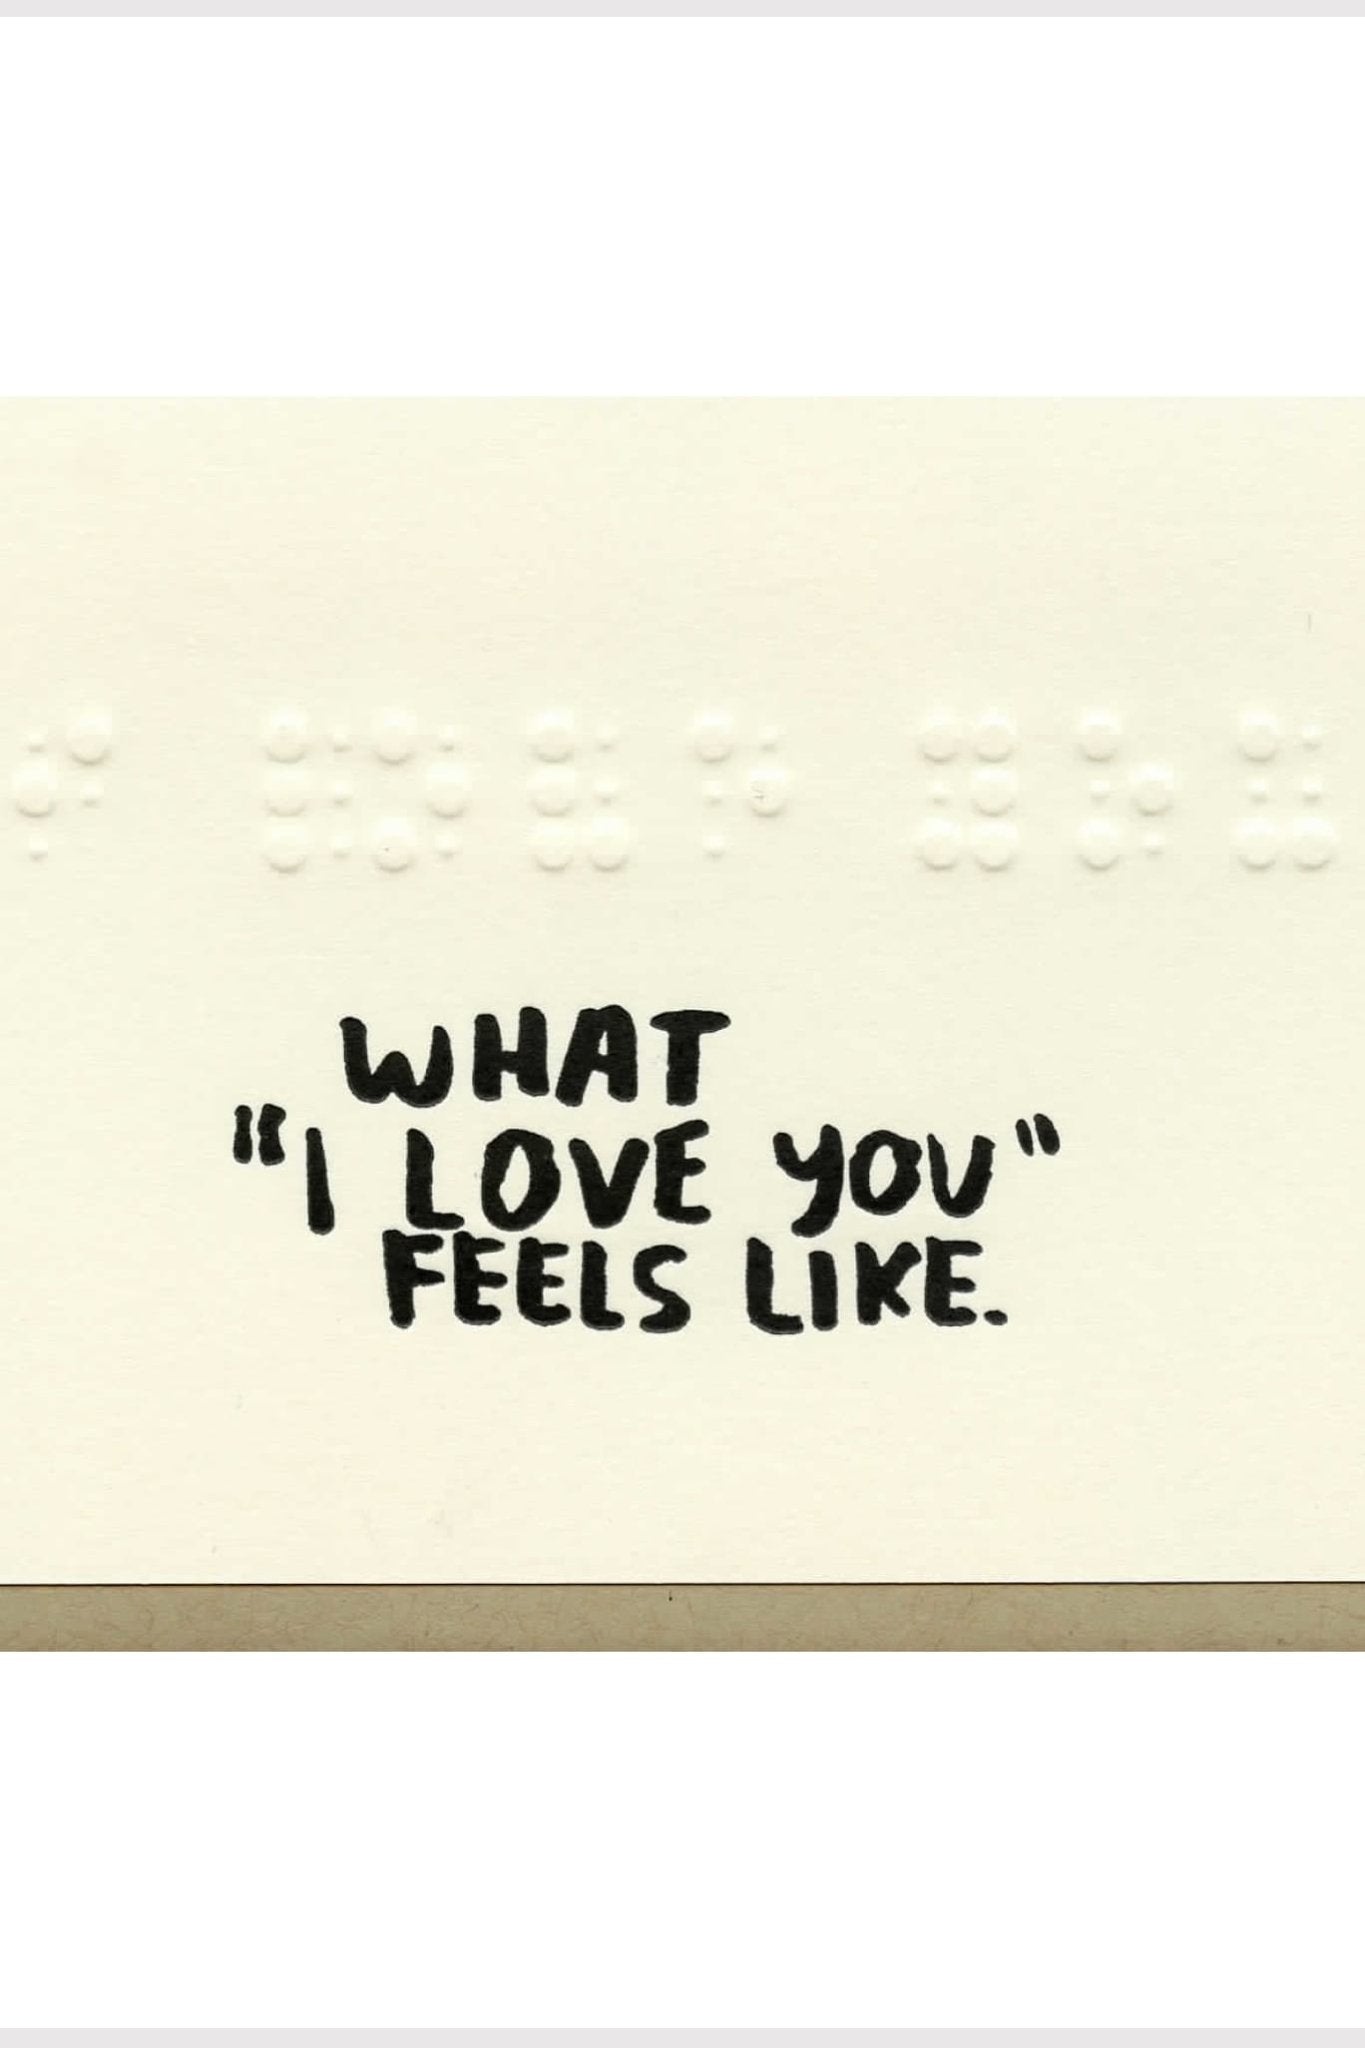 What I Love You Feels Like Greeting Card - Greeting & Note Cards